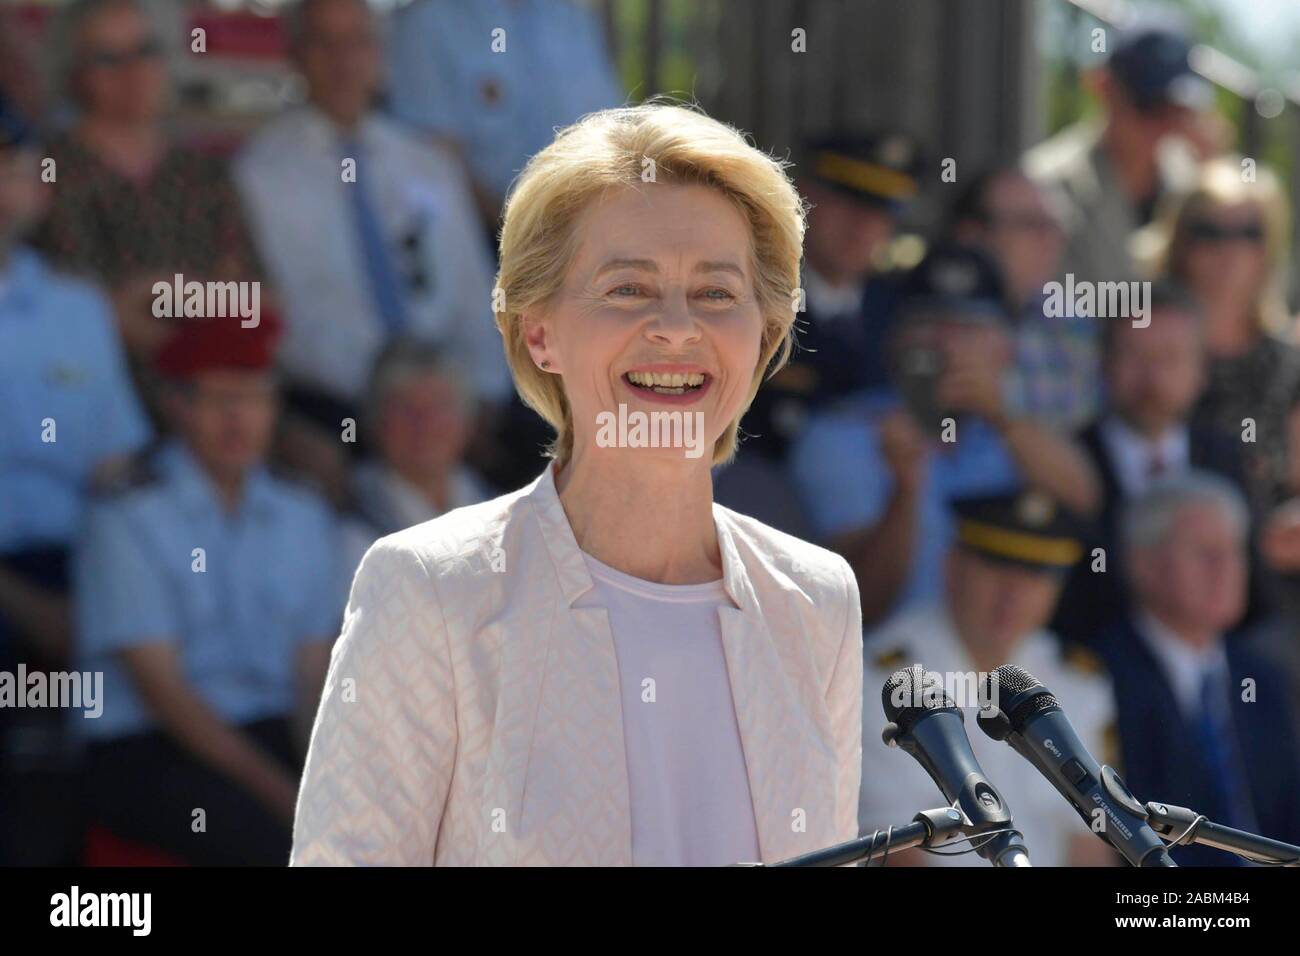 Festive promotion appeal for prospective officers of the University of the Federal Armed Forces with Federal Defence Minister Ursula von der Leyen (pictured) in the courtyard of Nymphenburg Castle. [automated translation] Stock Photo